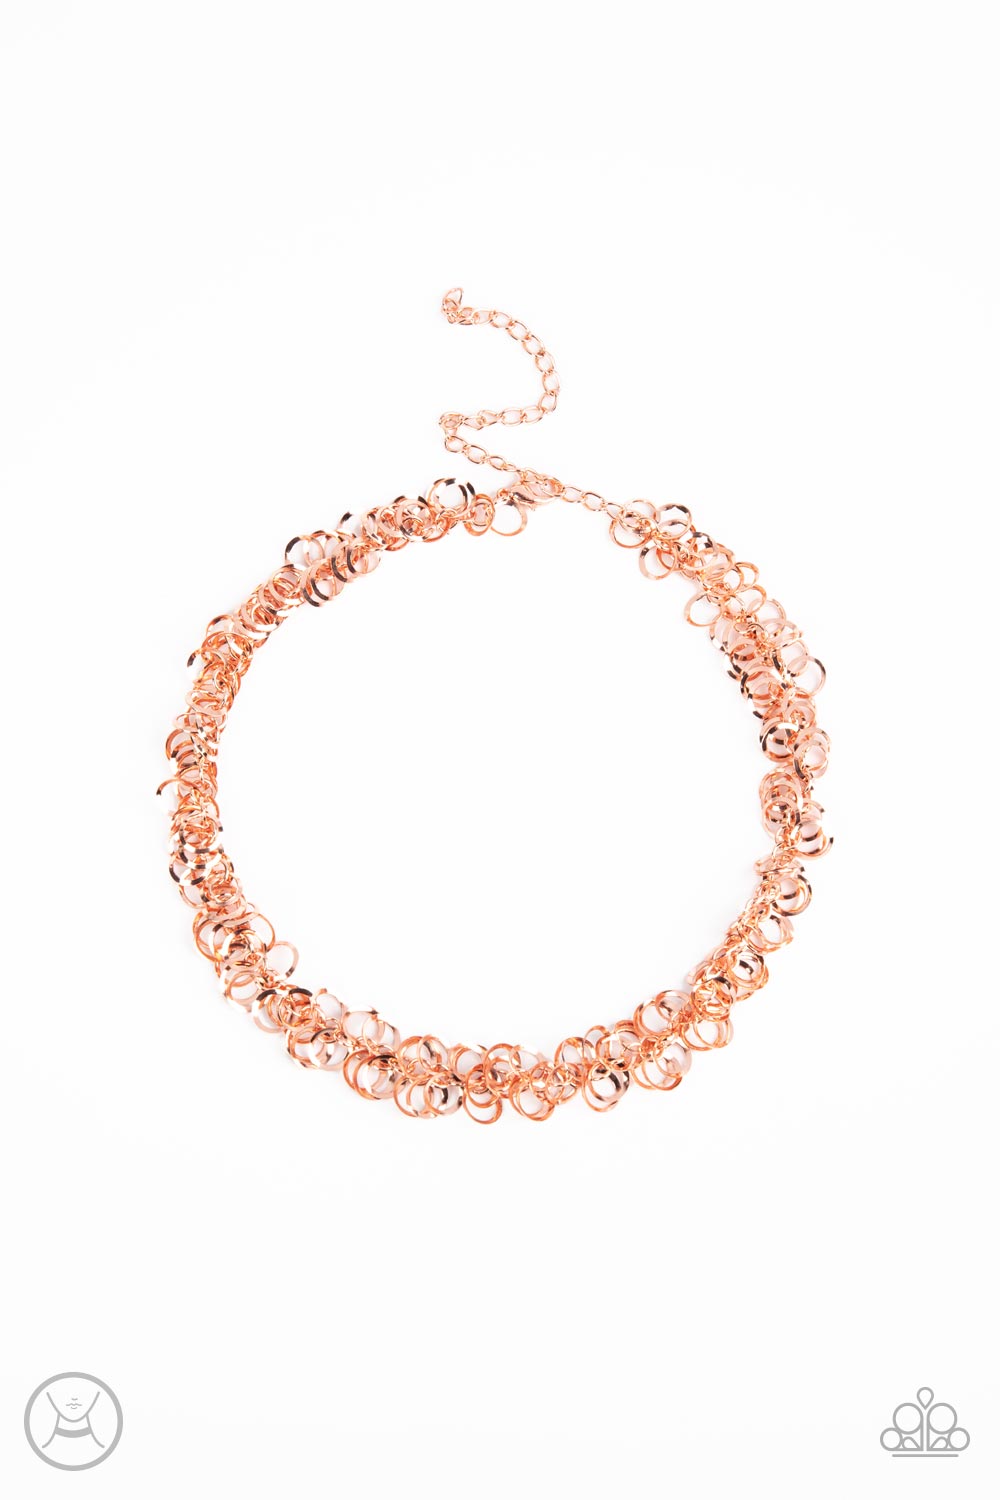 Cause a Commotion - Copper choker necklace 1734